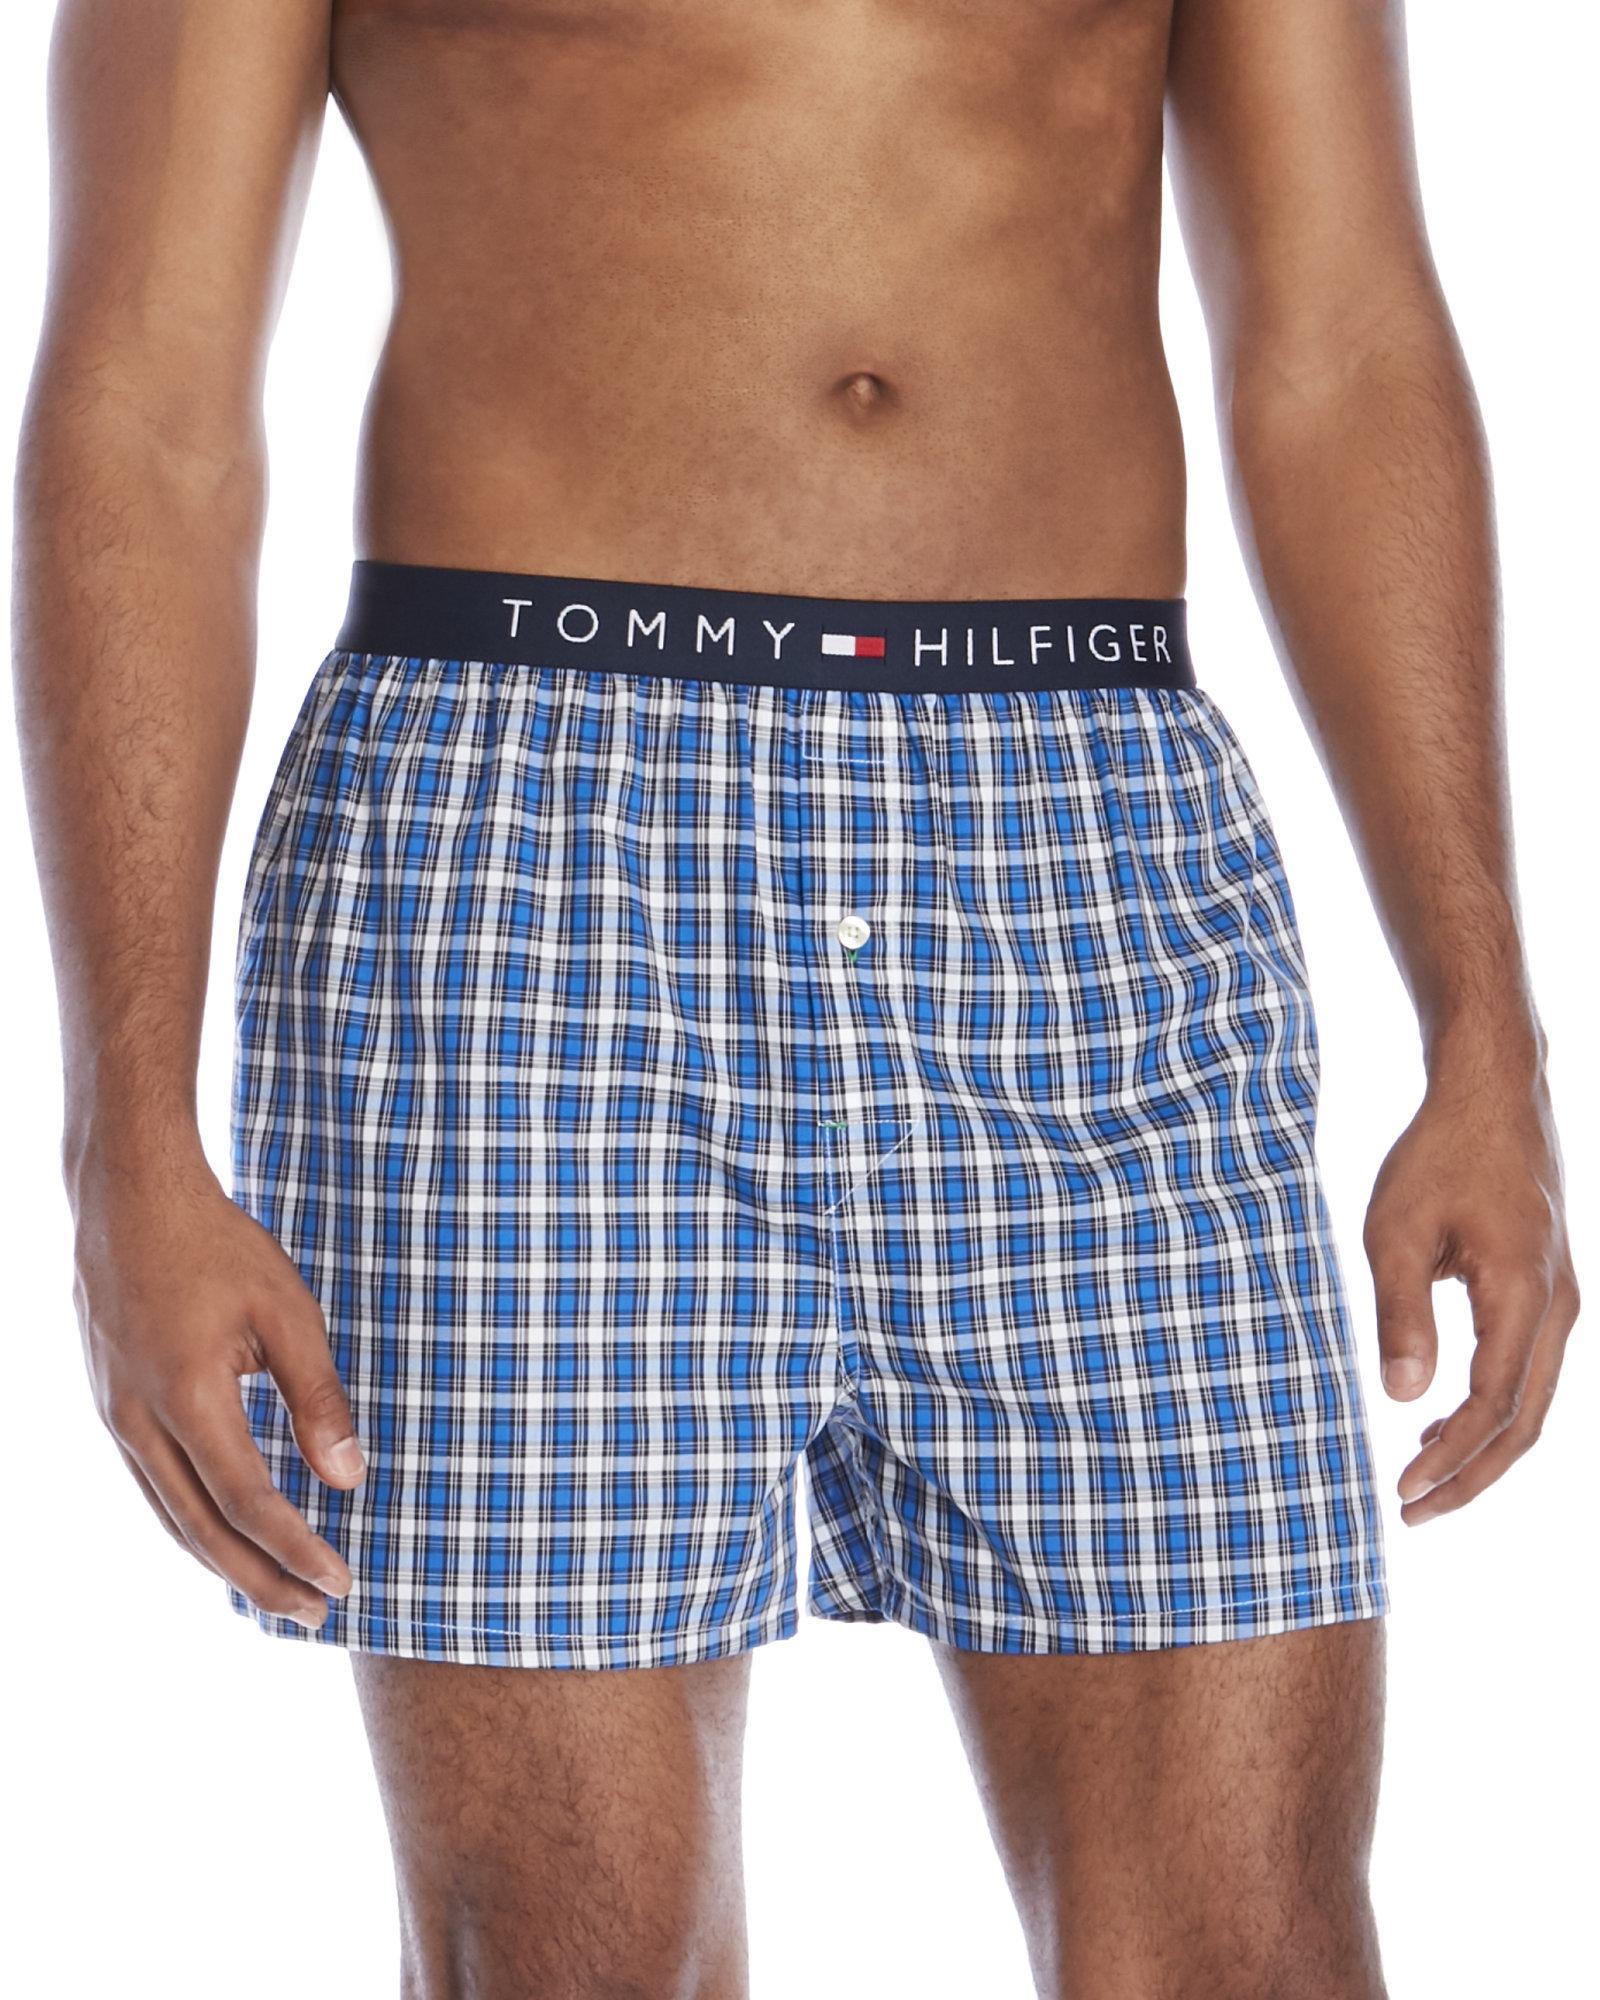 Tommy Hilfiger Cotton Printed Woven Boxer Shorts in Blue for Men - Lyst